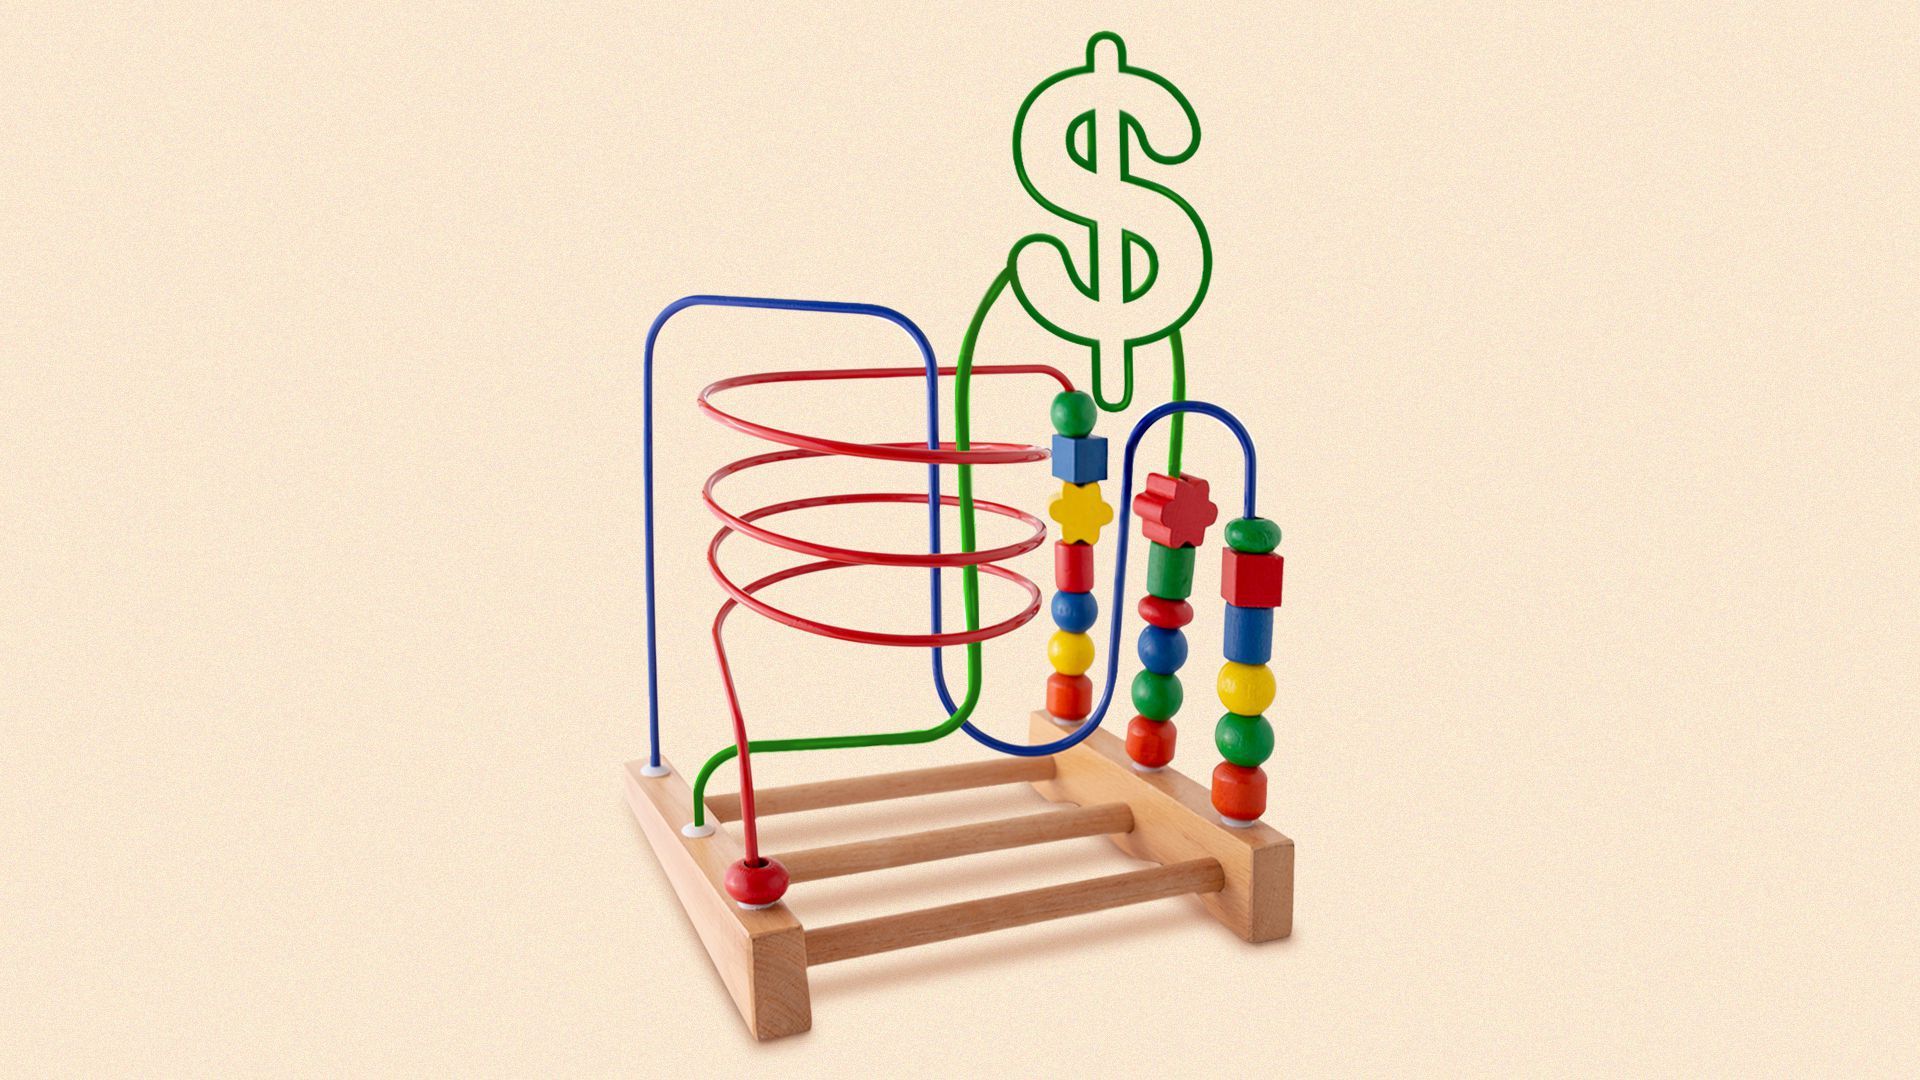 A child's toy with a dollar sign.